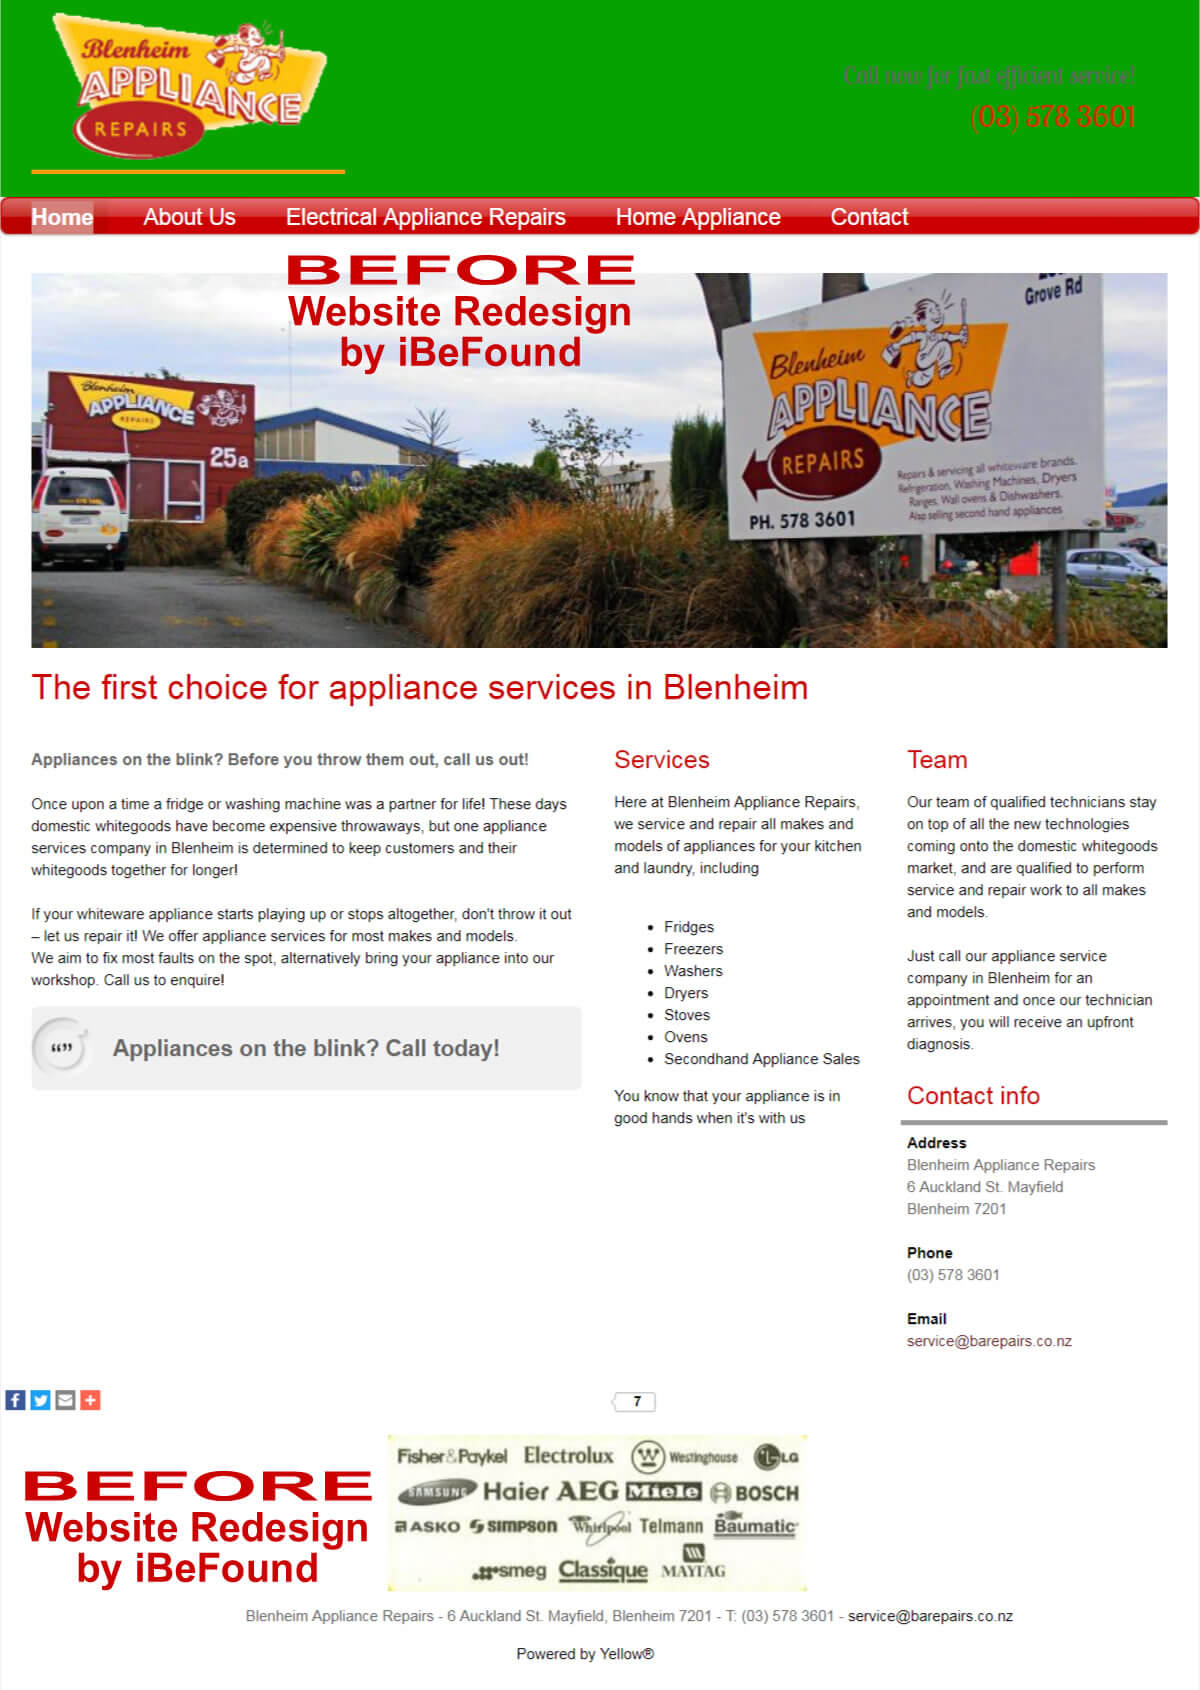 Homepage Of Blenheim Appliance Repairs Before Website Redesign By IBeFound